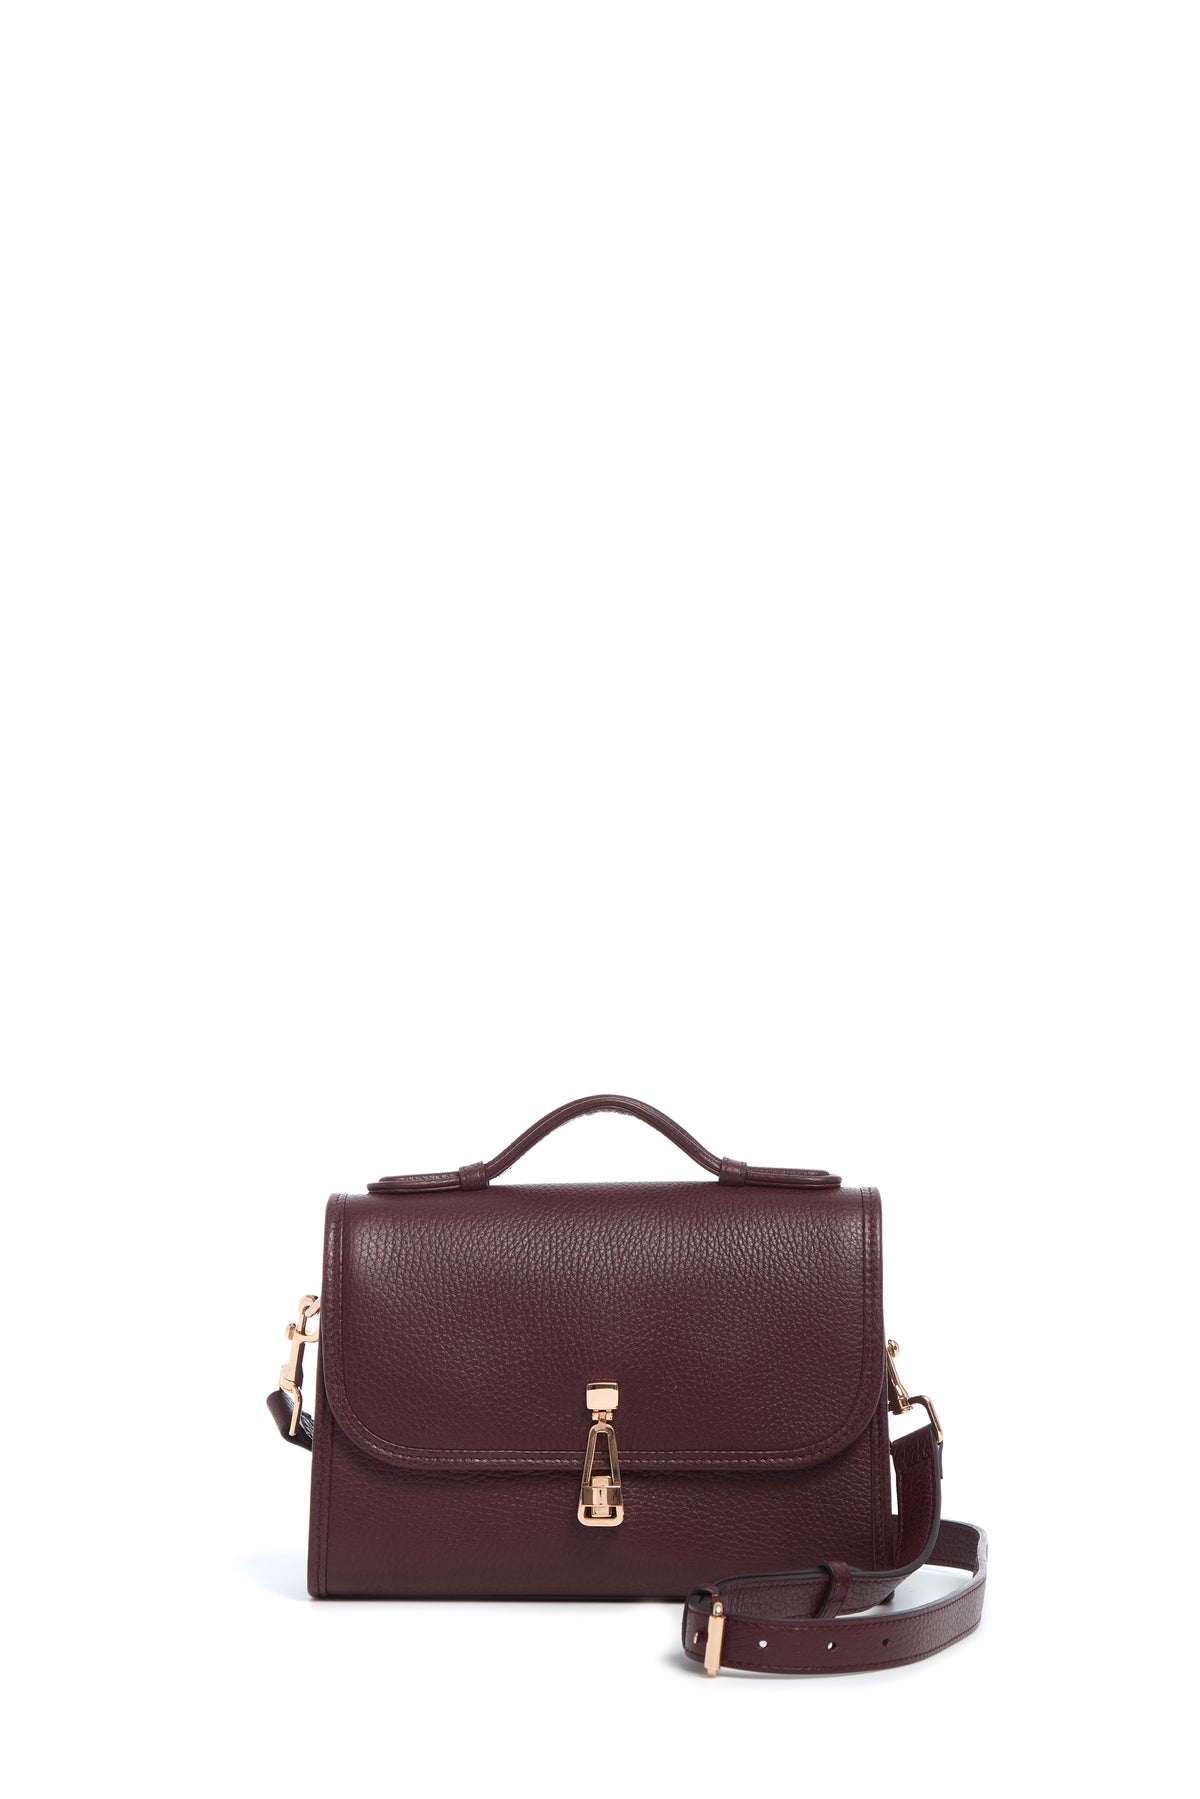 Small Leonora Bag in Bordeaux Grained Leather